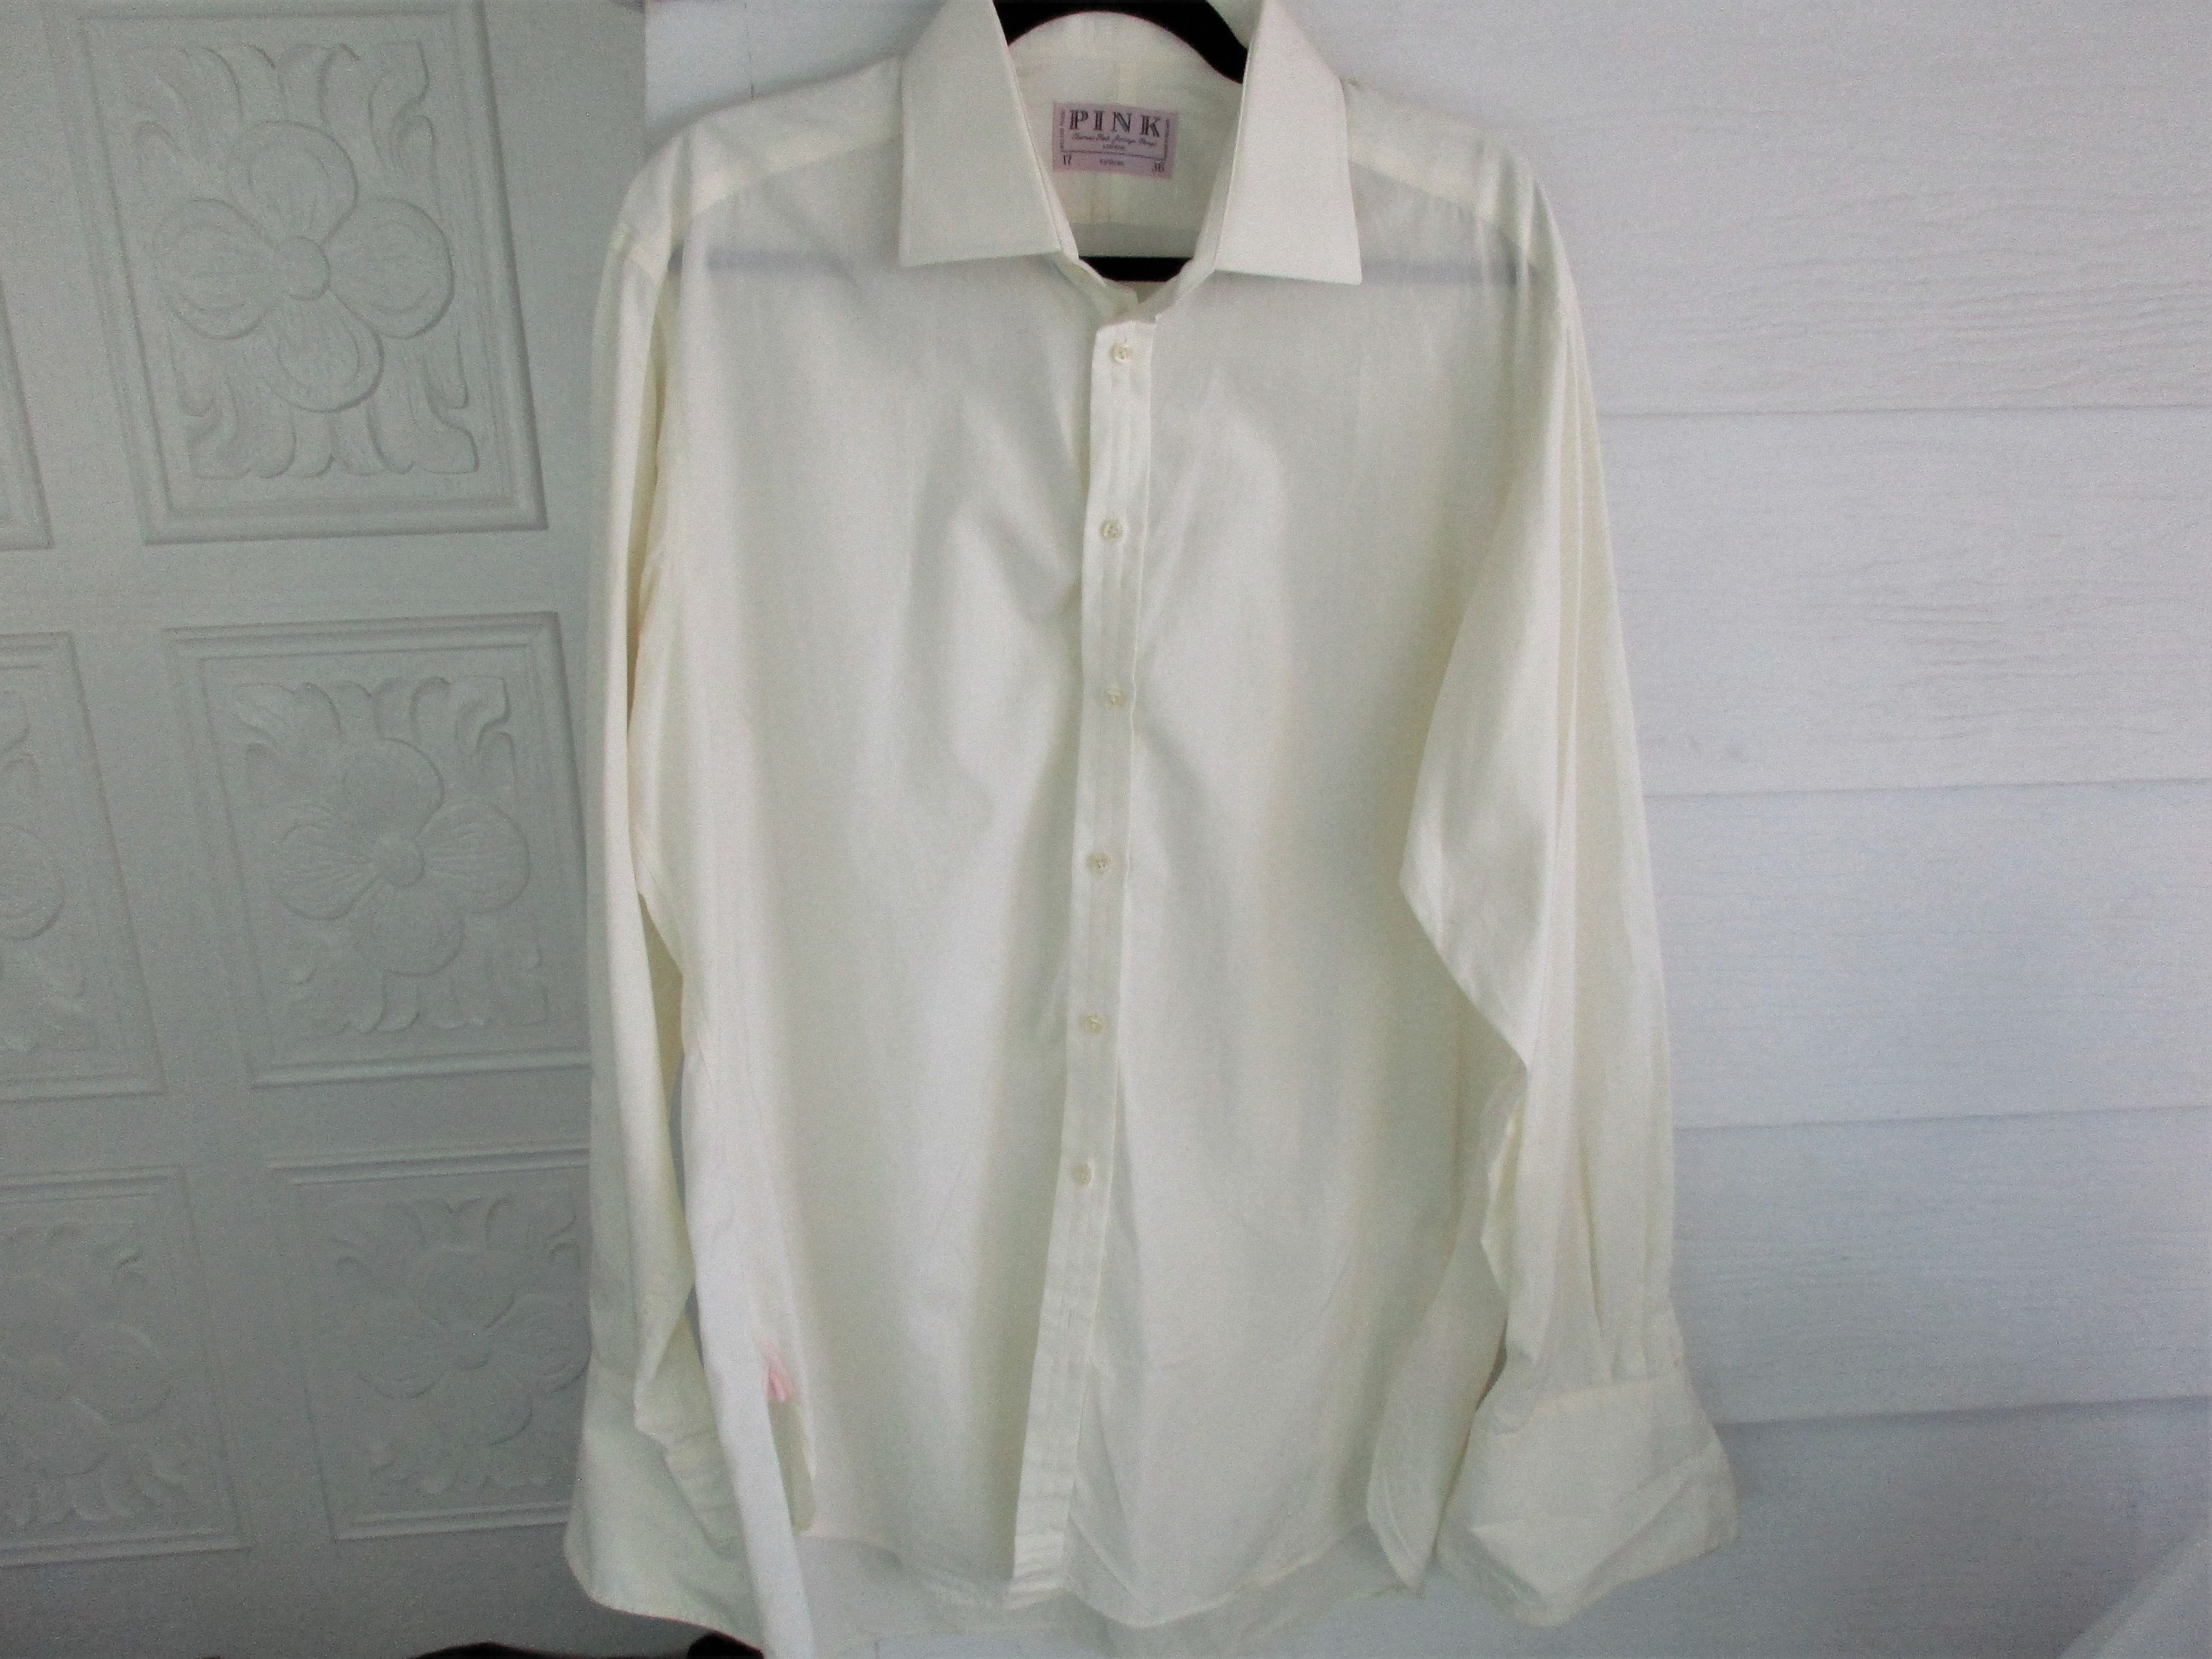 Thomas Pink Marcella Super Slim-fit Double-cuff Evening Shirt in White for  Men